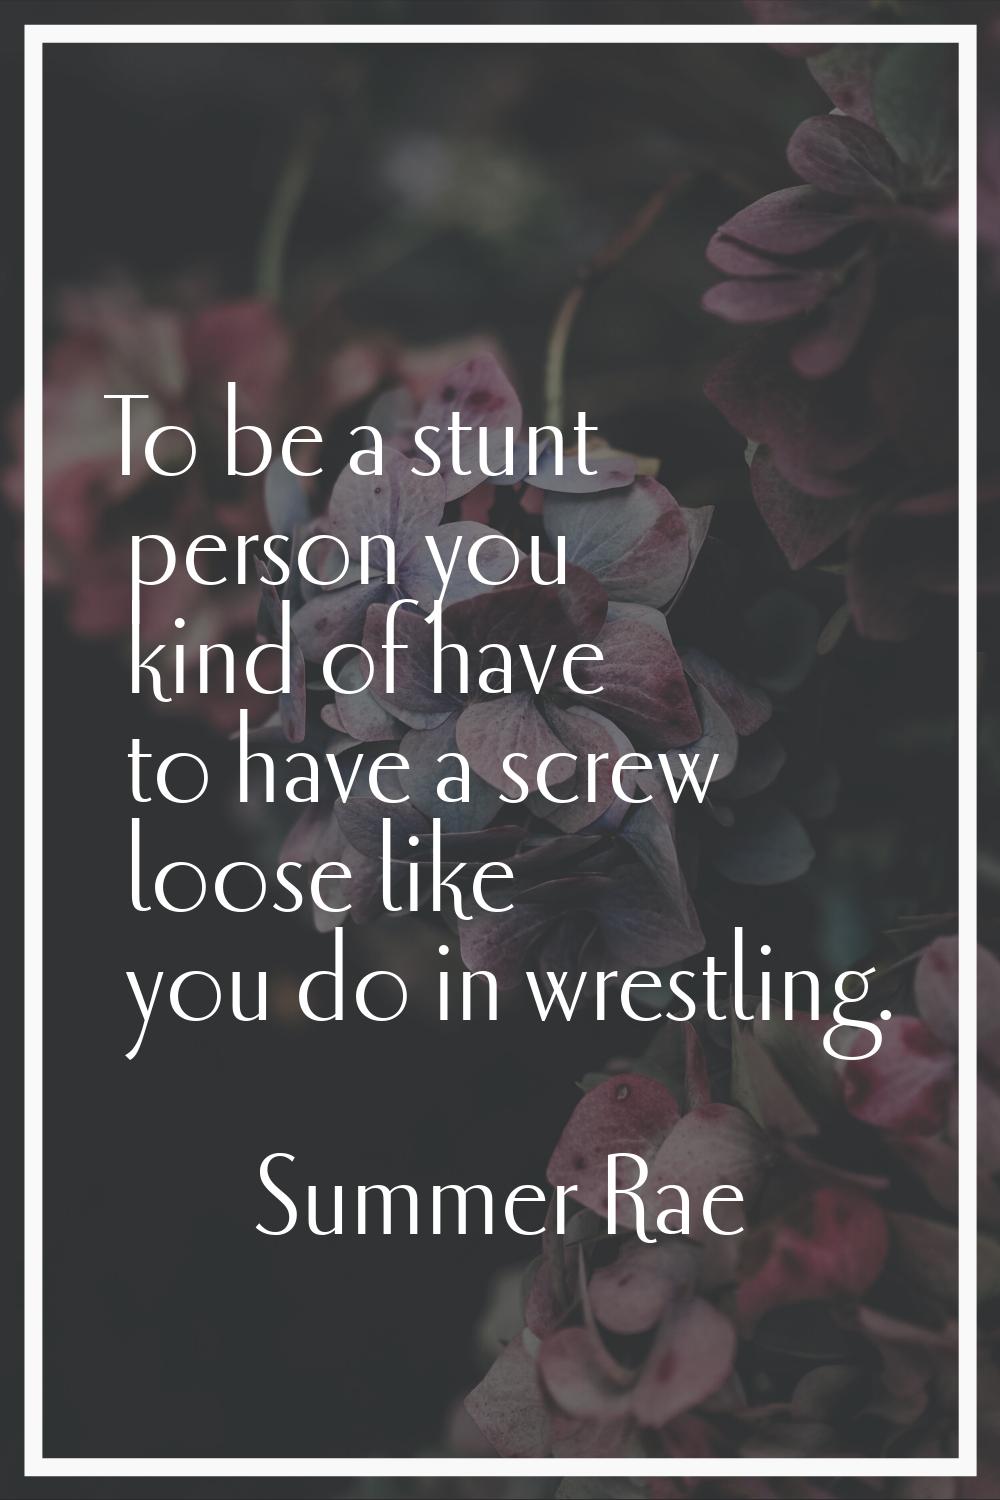 To be a stunt person you kind of have to have a screw loose like you do in wrestling.